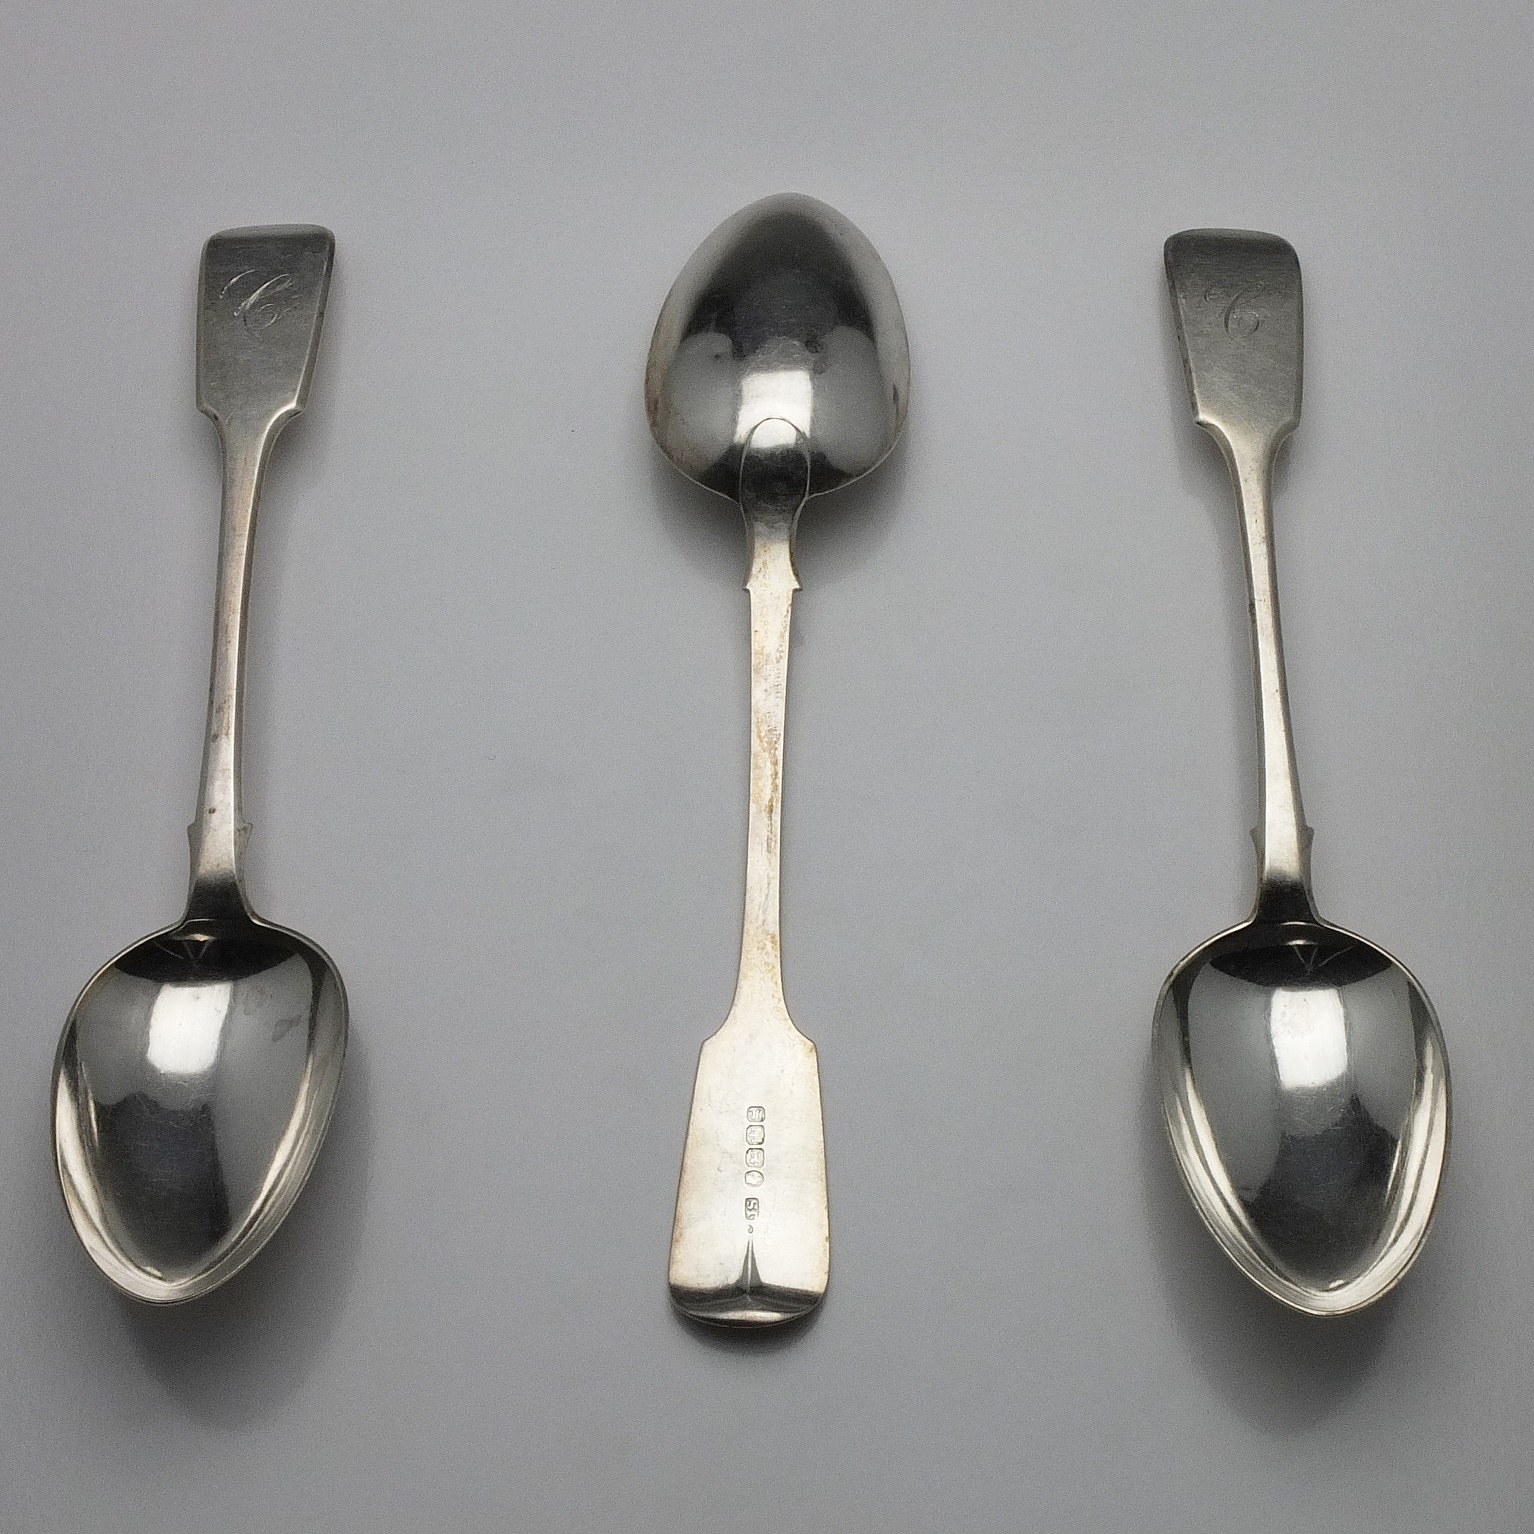 'Three Victorian Monogrammed Sterling Silver Table Spoons John Stone Exeter 1854'